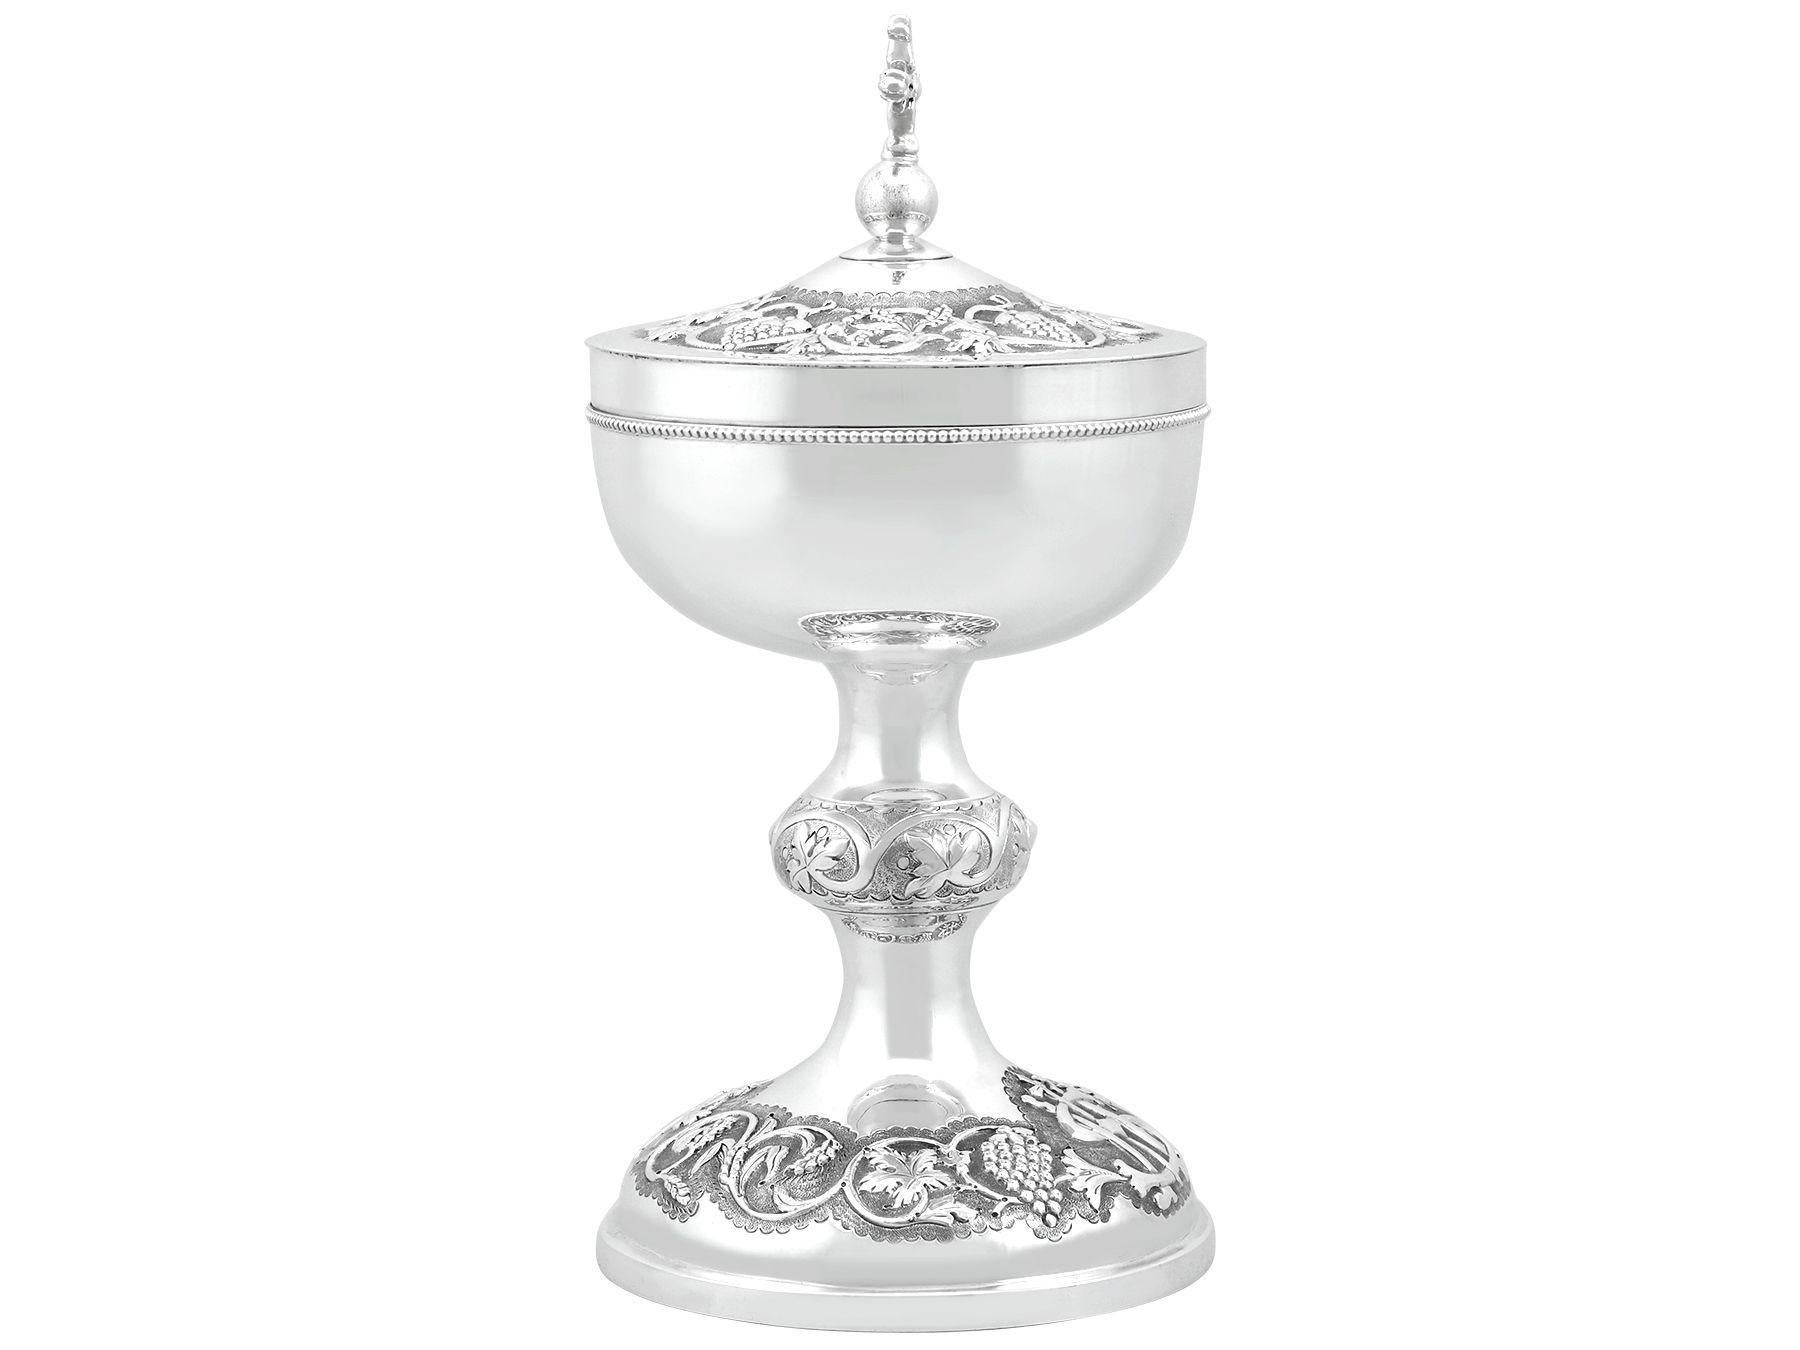 An exceptional, fine and impressive antique Edwardian Irish sterling silver ecclesiastical ciborium; an addition to our religious silverware collection

This exceptional antique Edwardian Irish sterling silver ciborium*/ecclesiastical chalice has